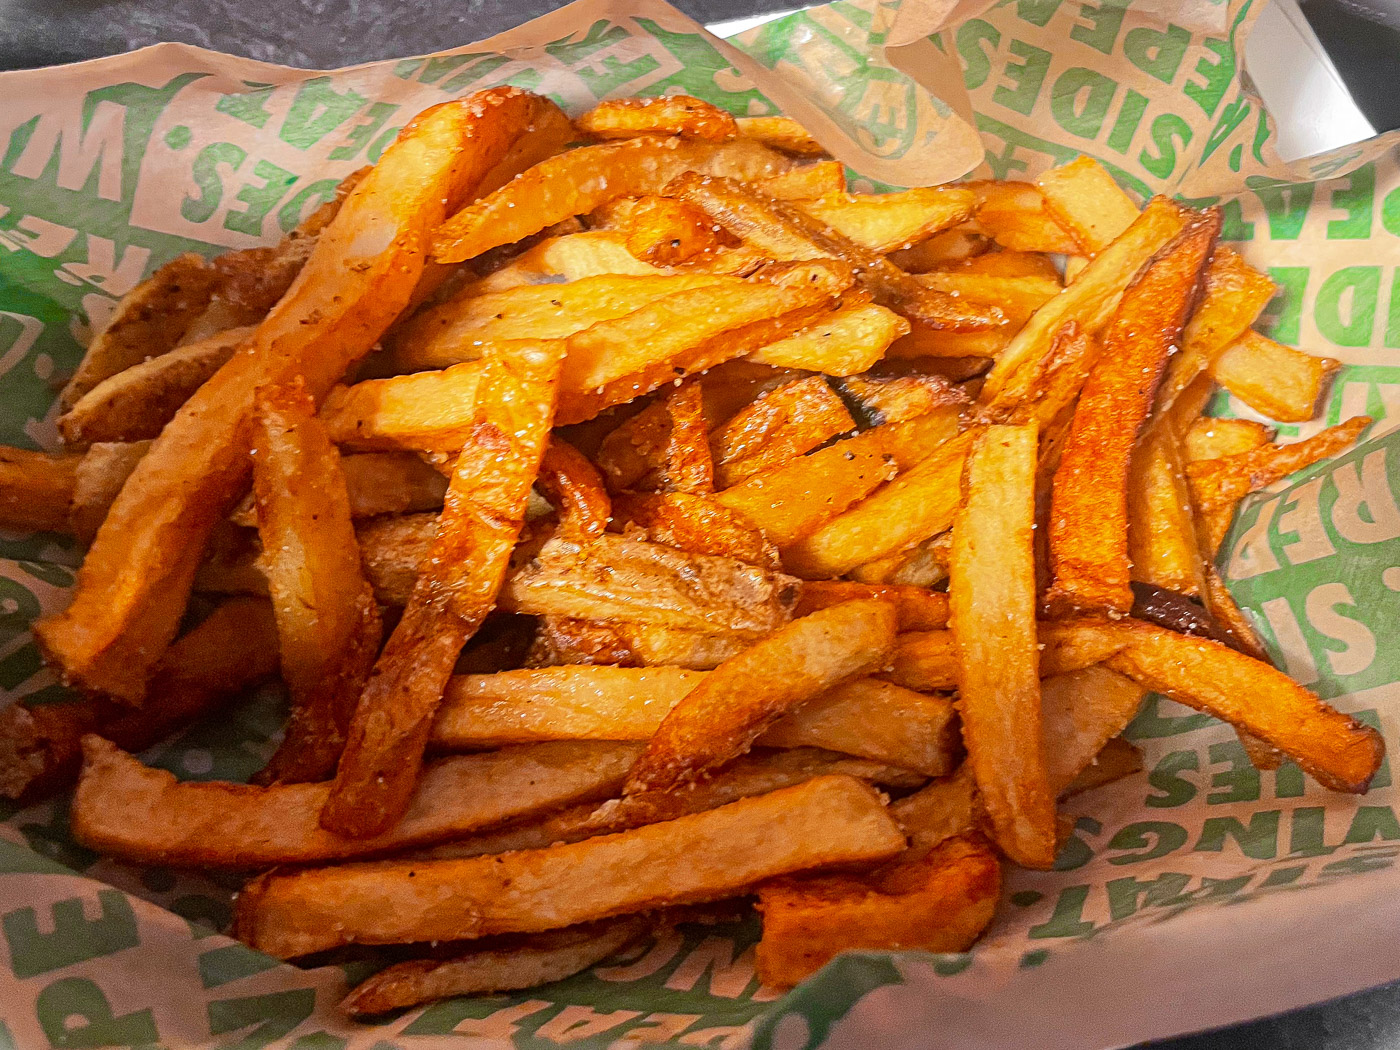 Photo of a Wingstop basket of french fries